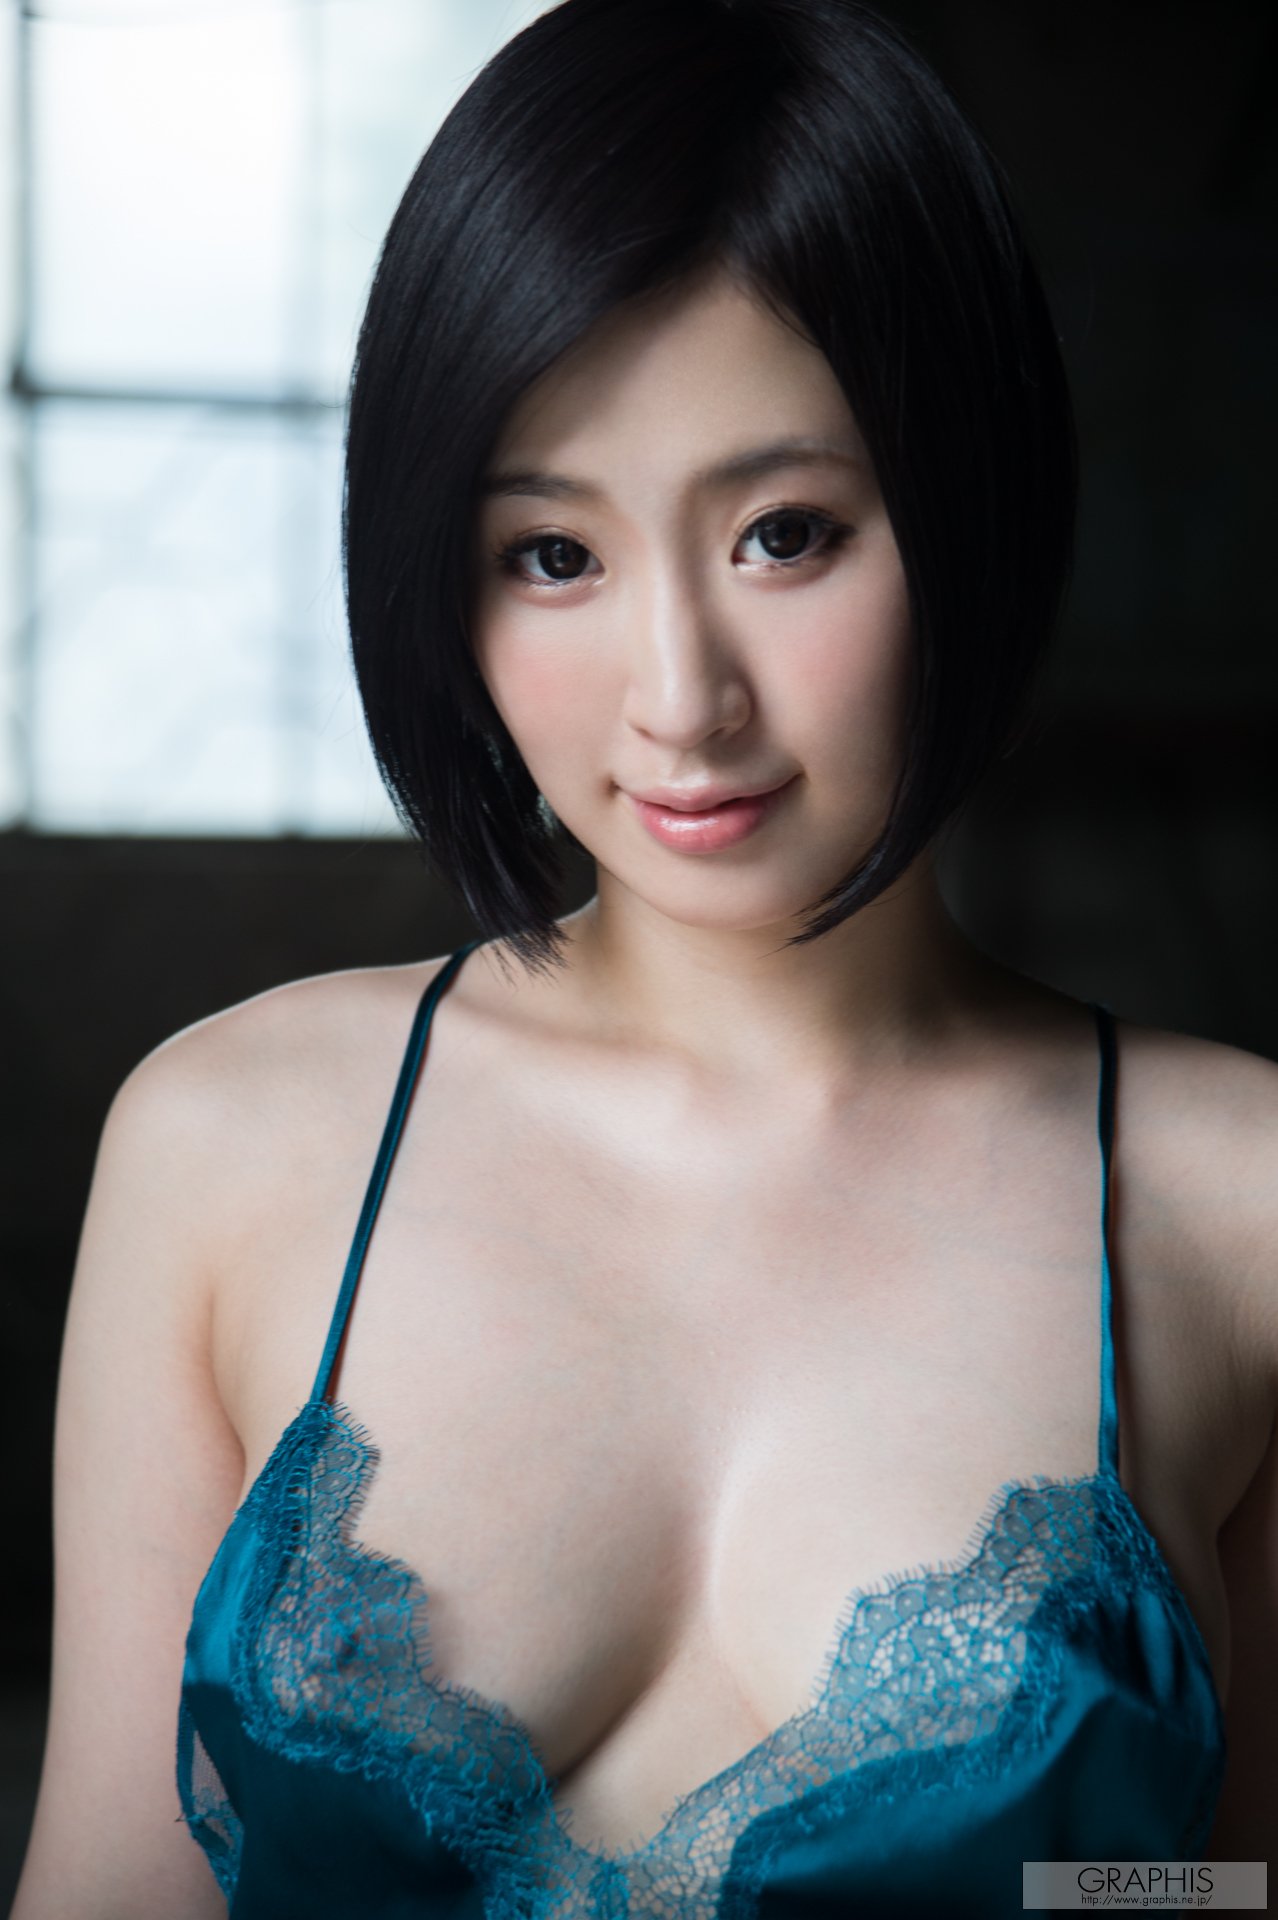 Japanese Adult Actresses 11